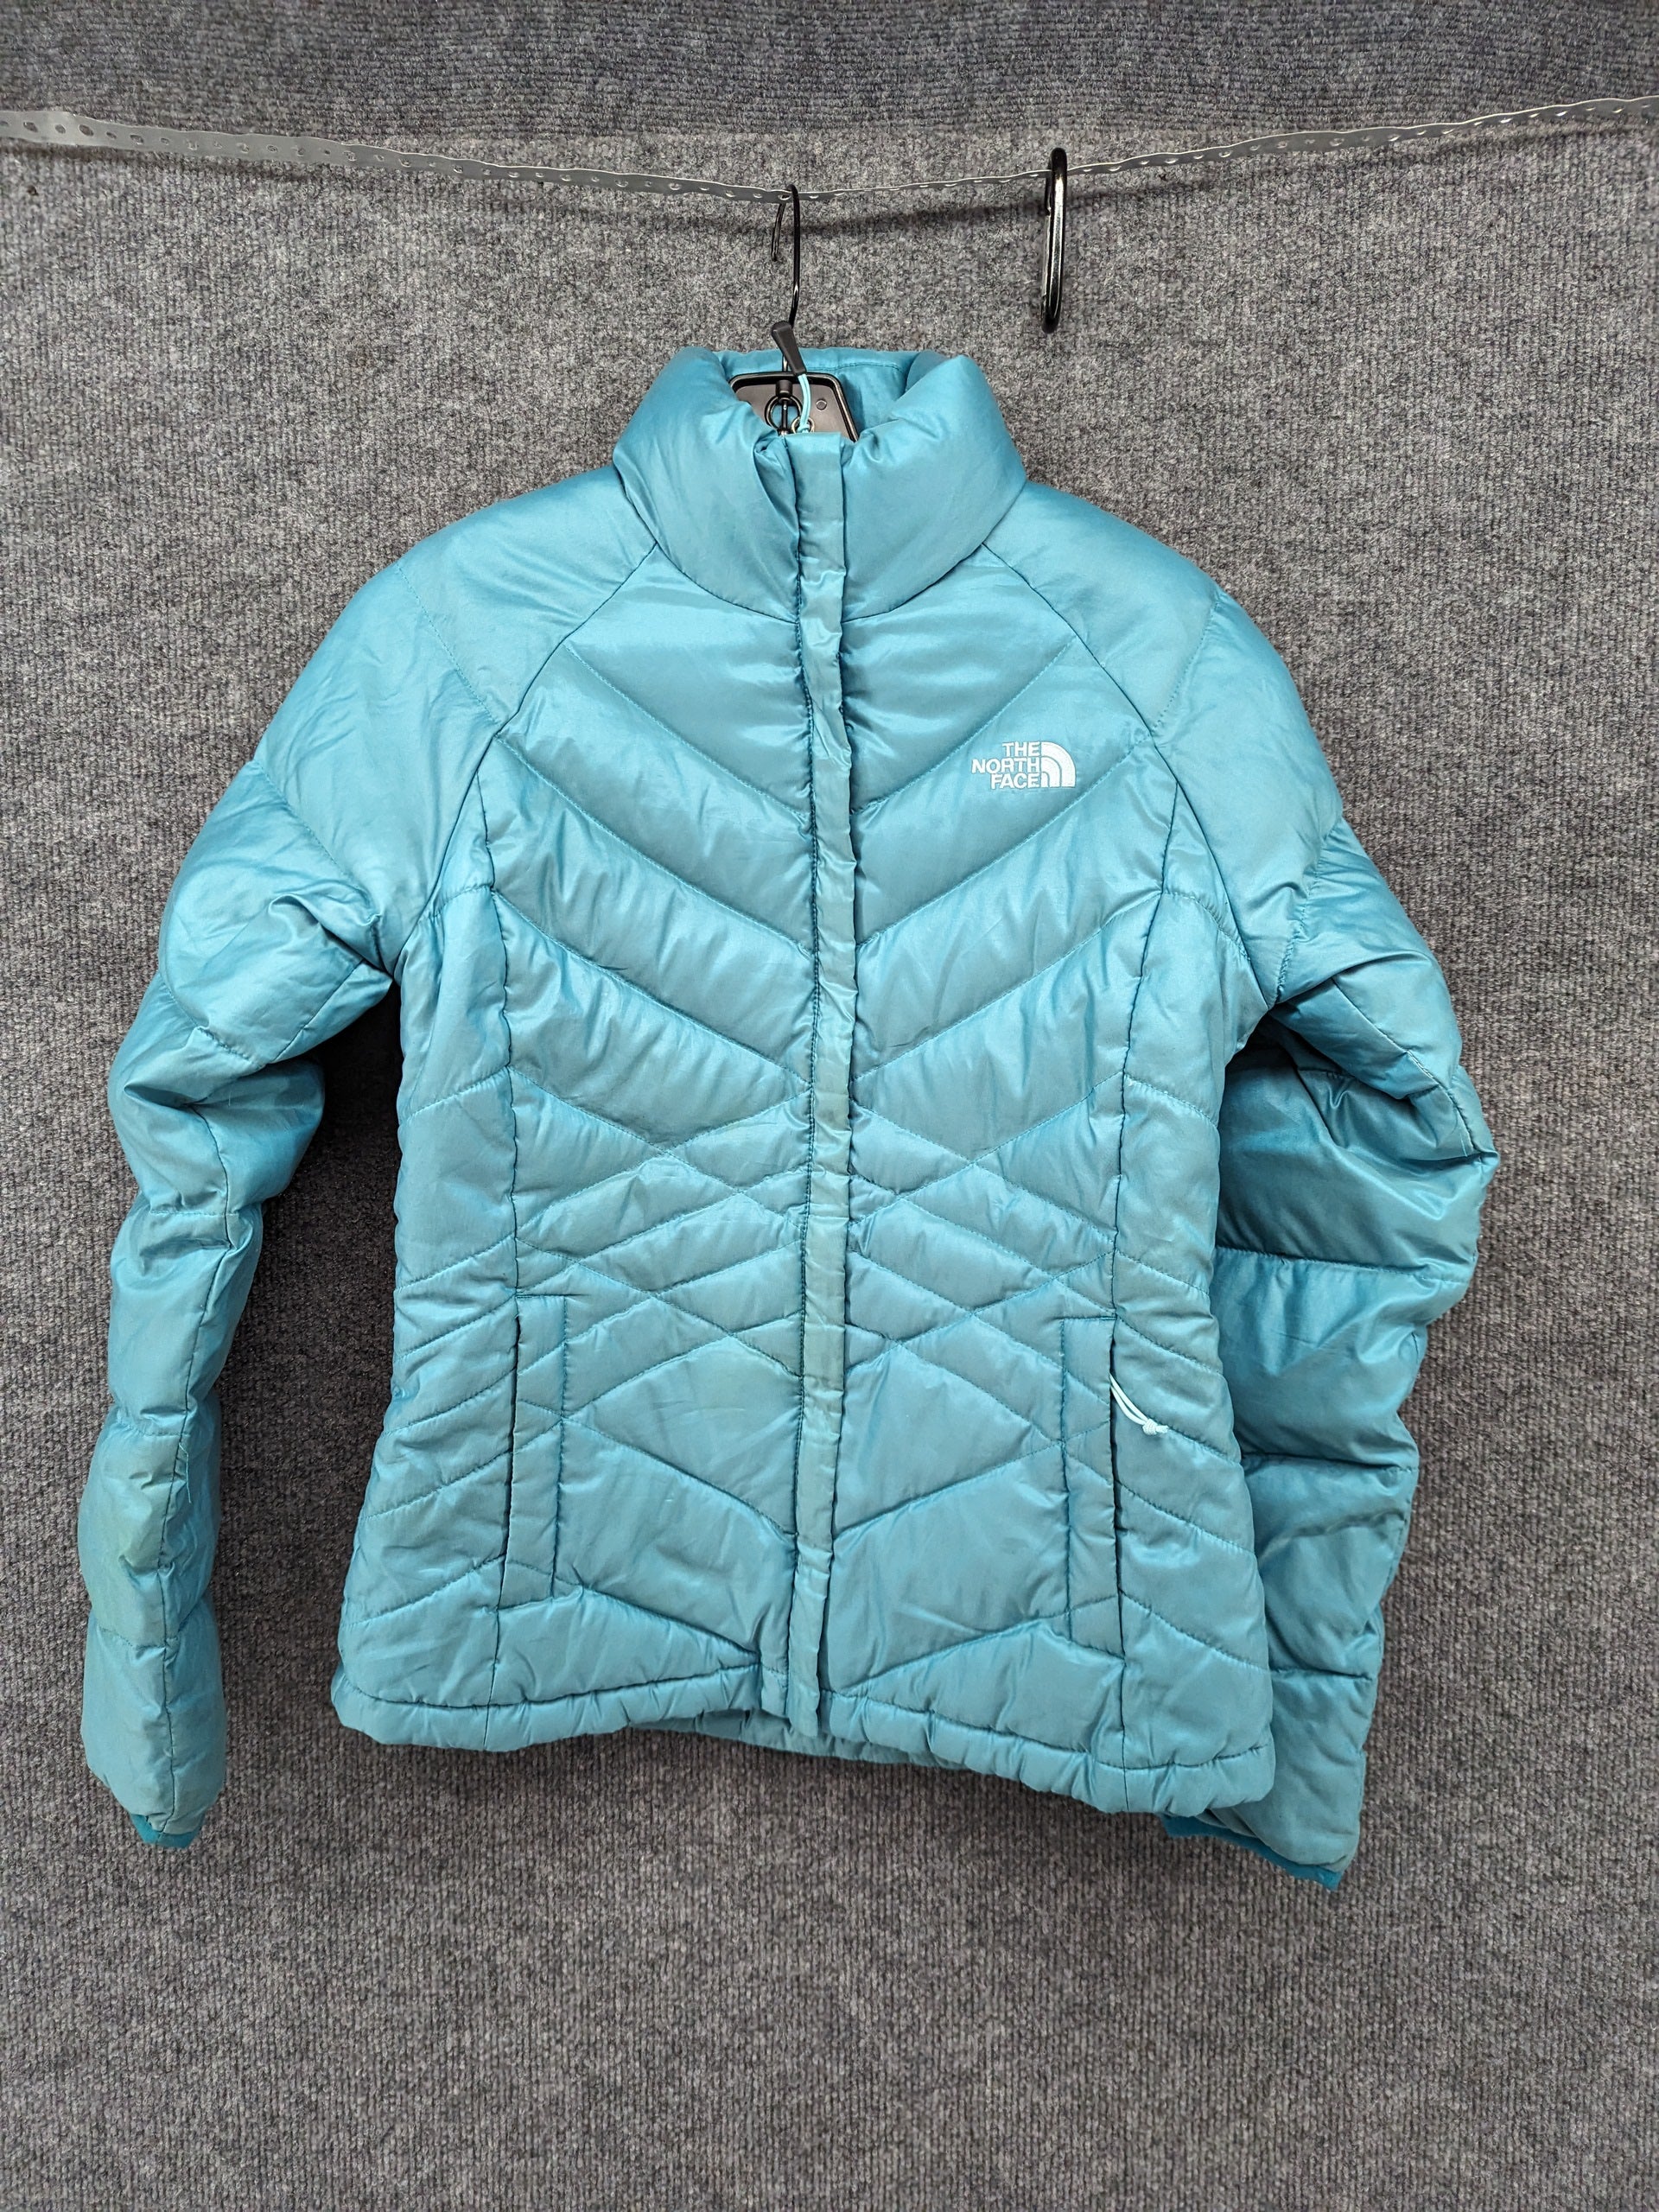 The North Face Size W Small Women's Synthetic Jacket – Rambleraven